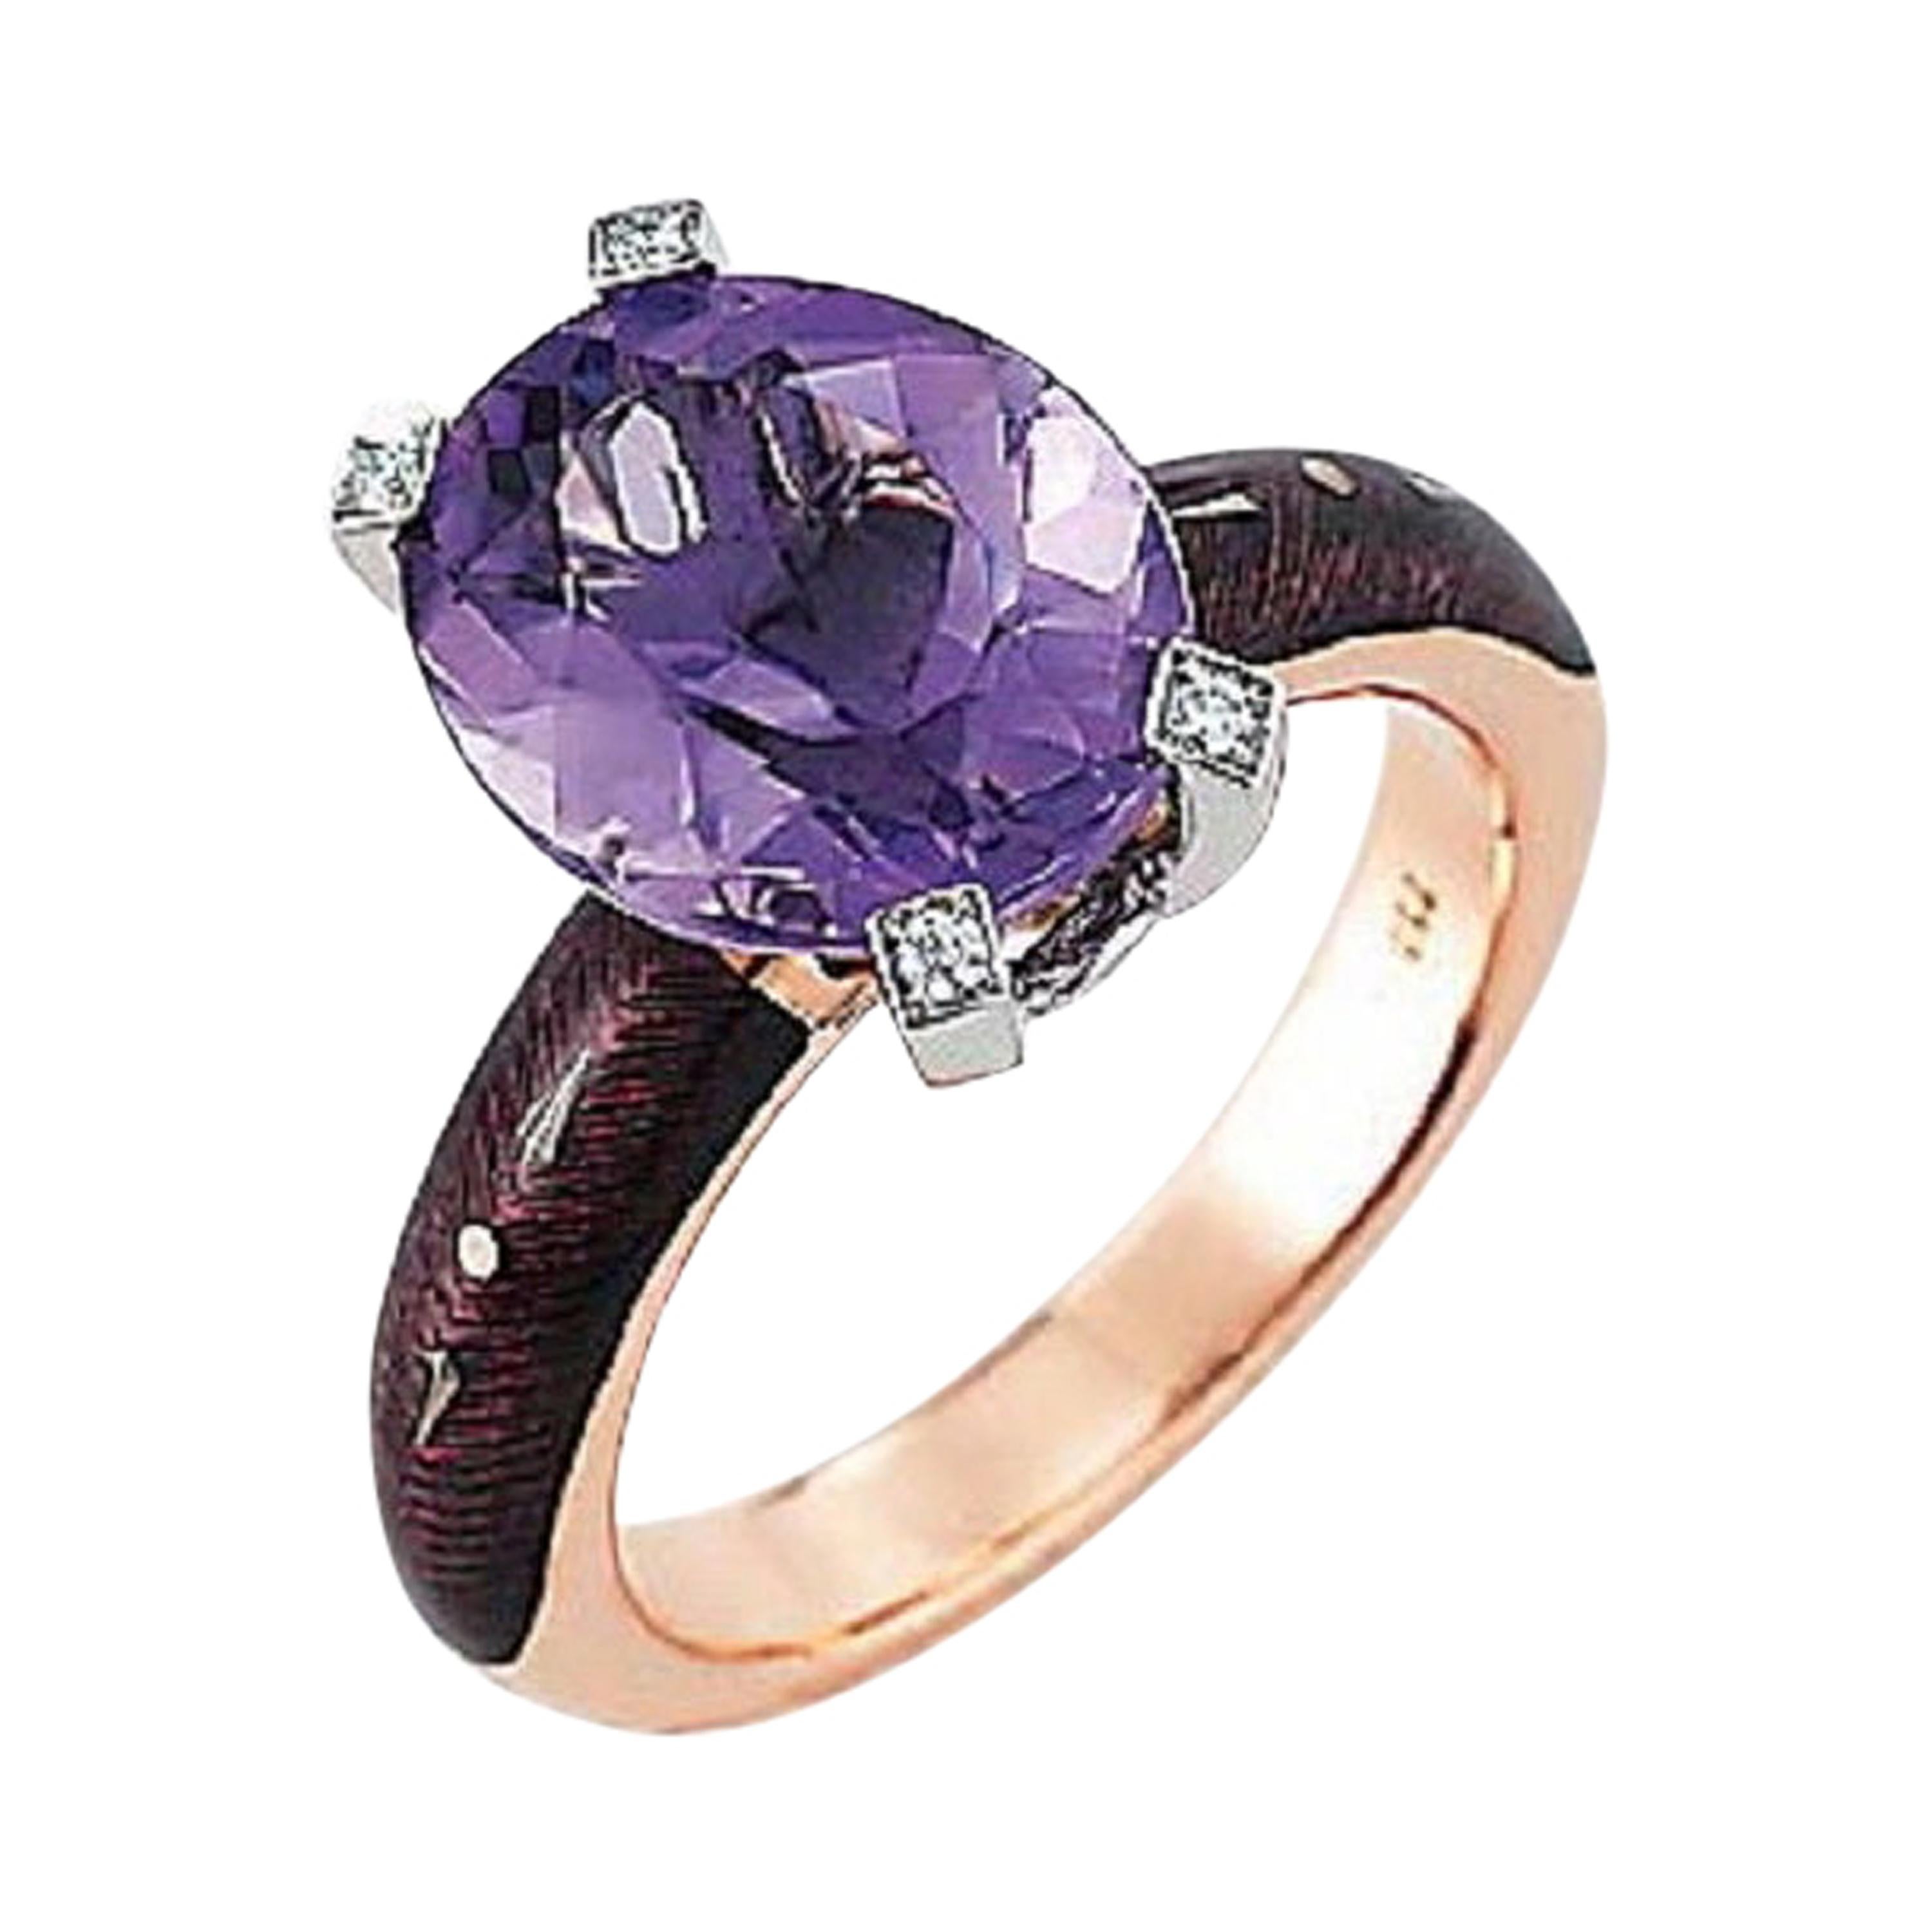 Victor Mayer Cocktail Lila Emaille-Ring 18k Rose / Weißgold Amethyst-Diamanten